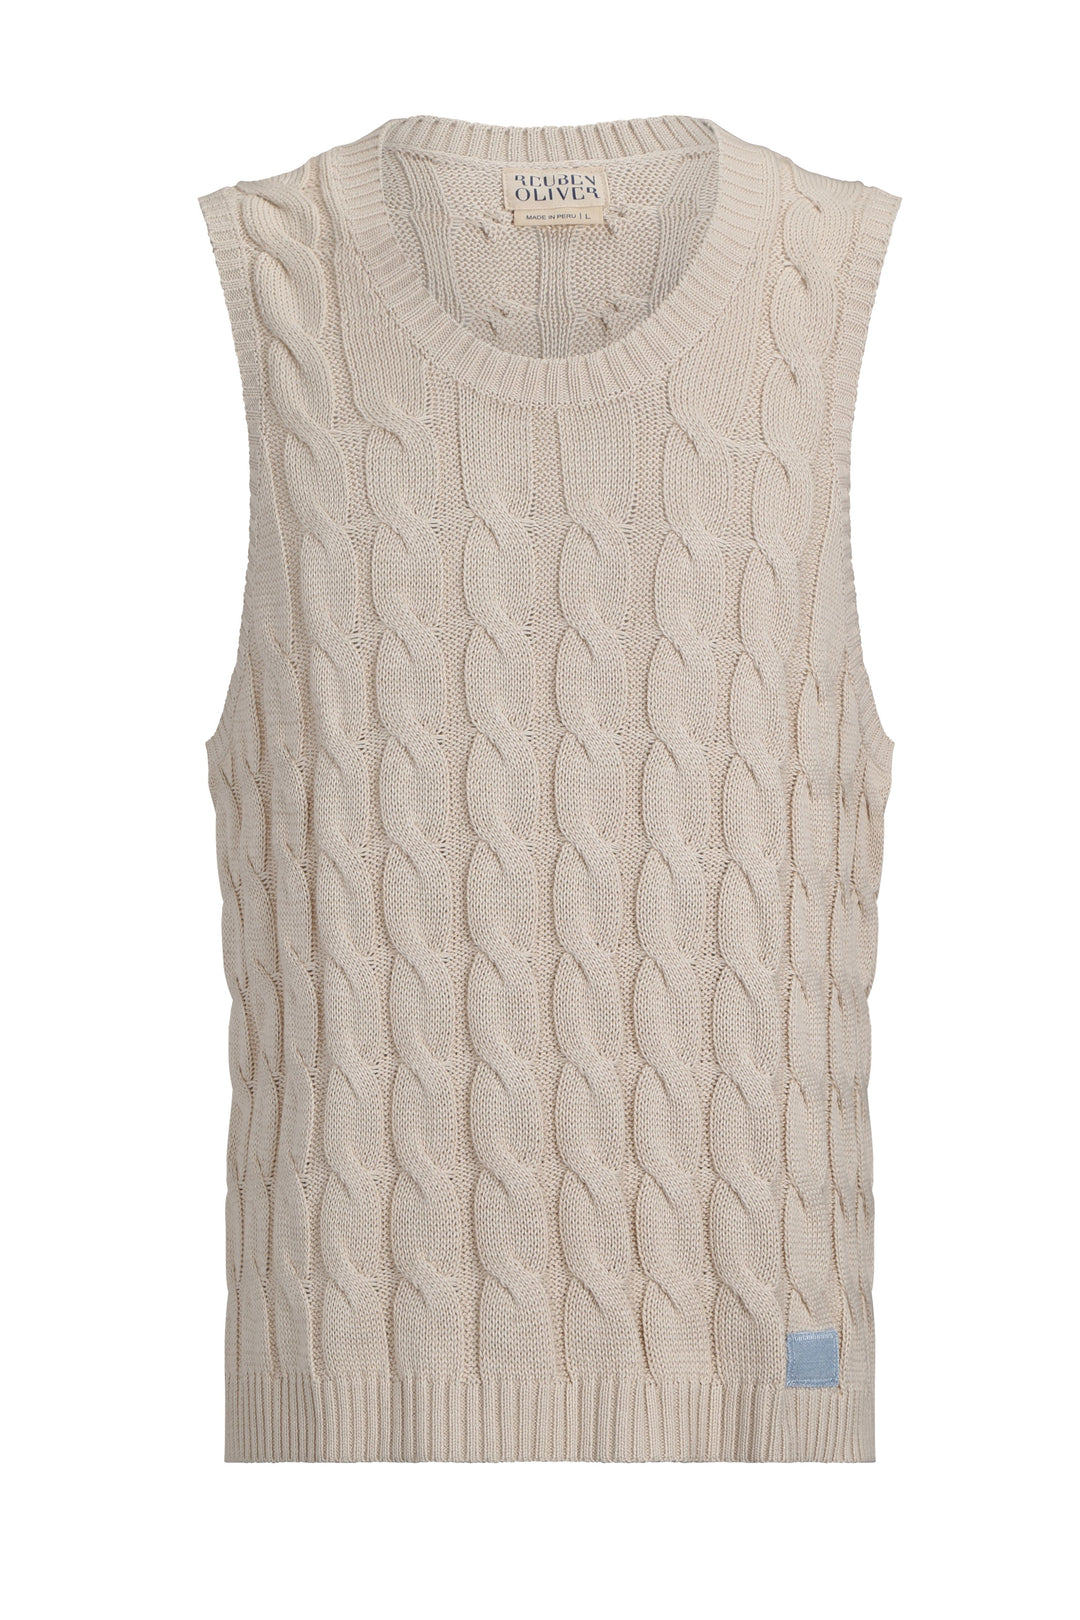 The Cable Knit Tank Top Reuben Oliver